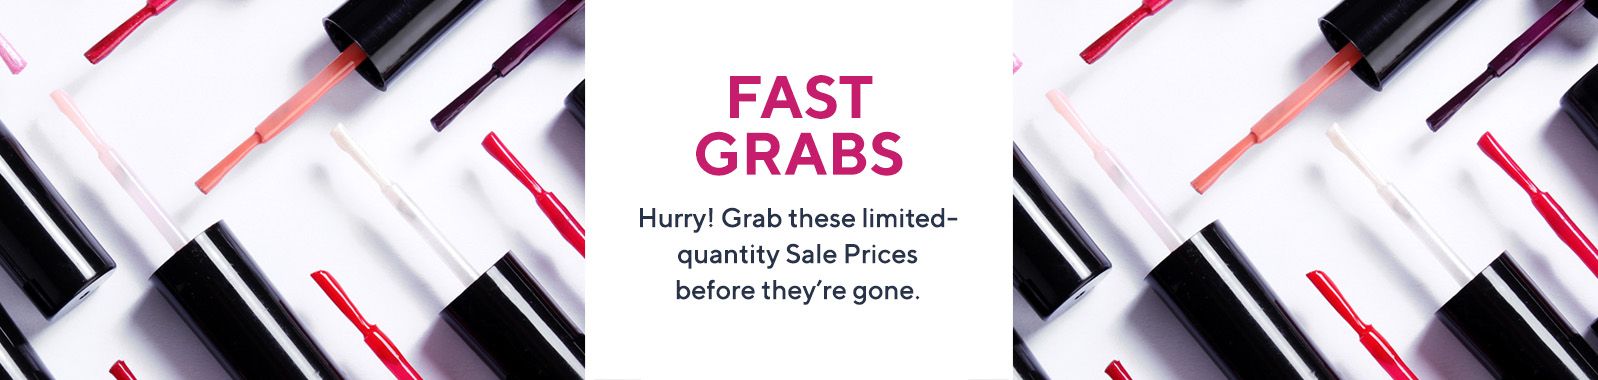 Fast Grabs  - Hurry! Grab these limited-quantity Sale Prices before they're gone.